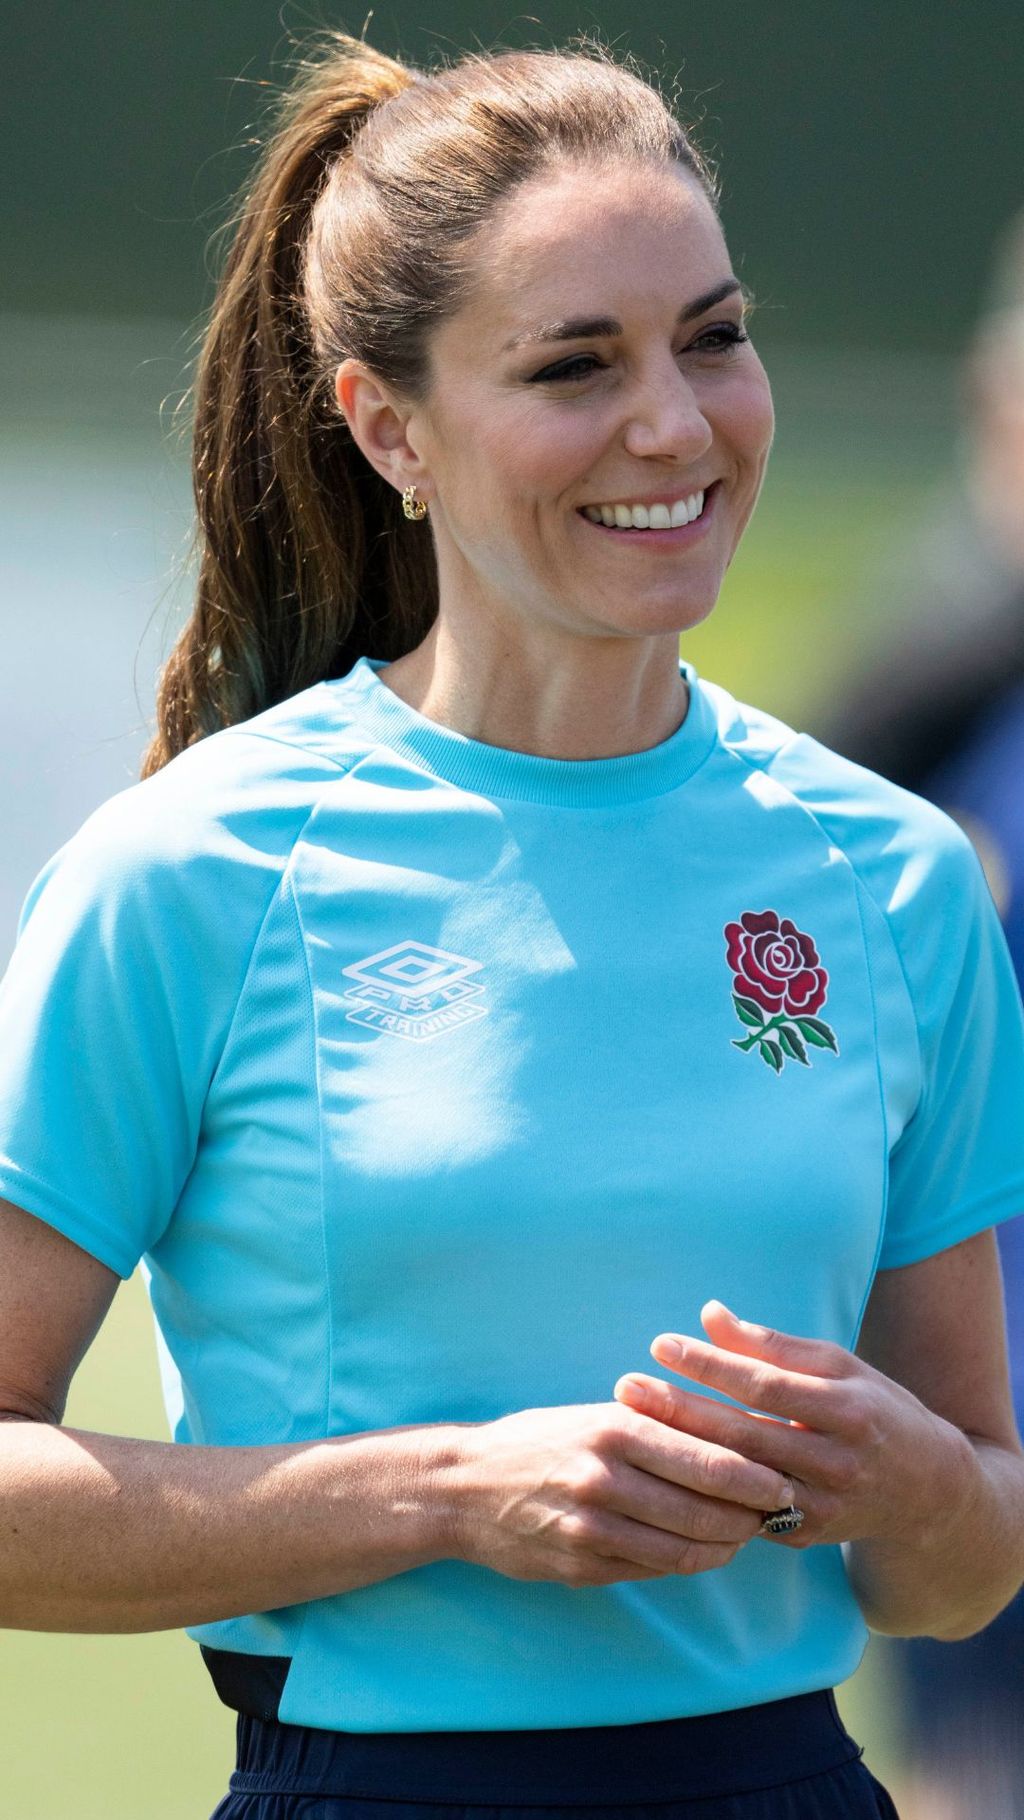 Kate Middleton’s gold hoops and high ponytail are so chic | Woman & Home